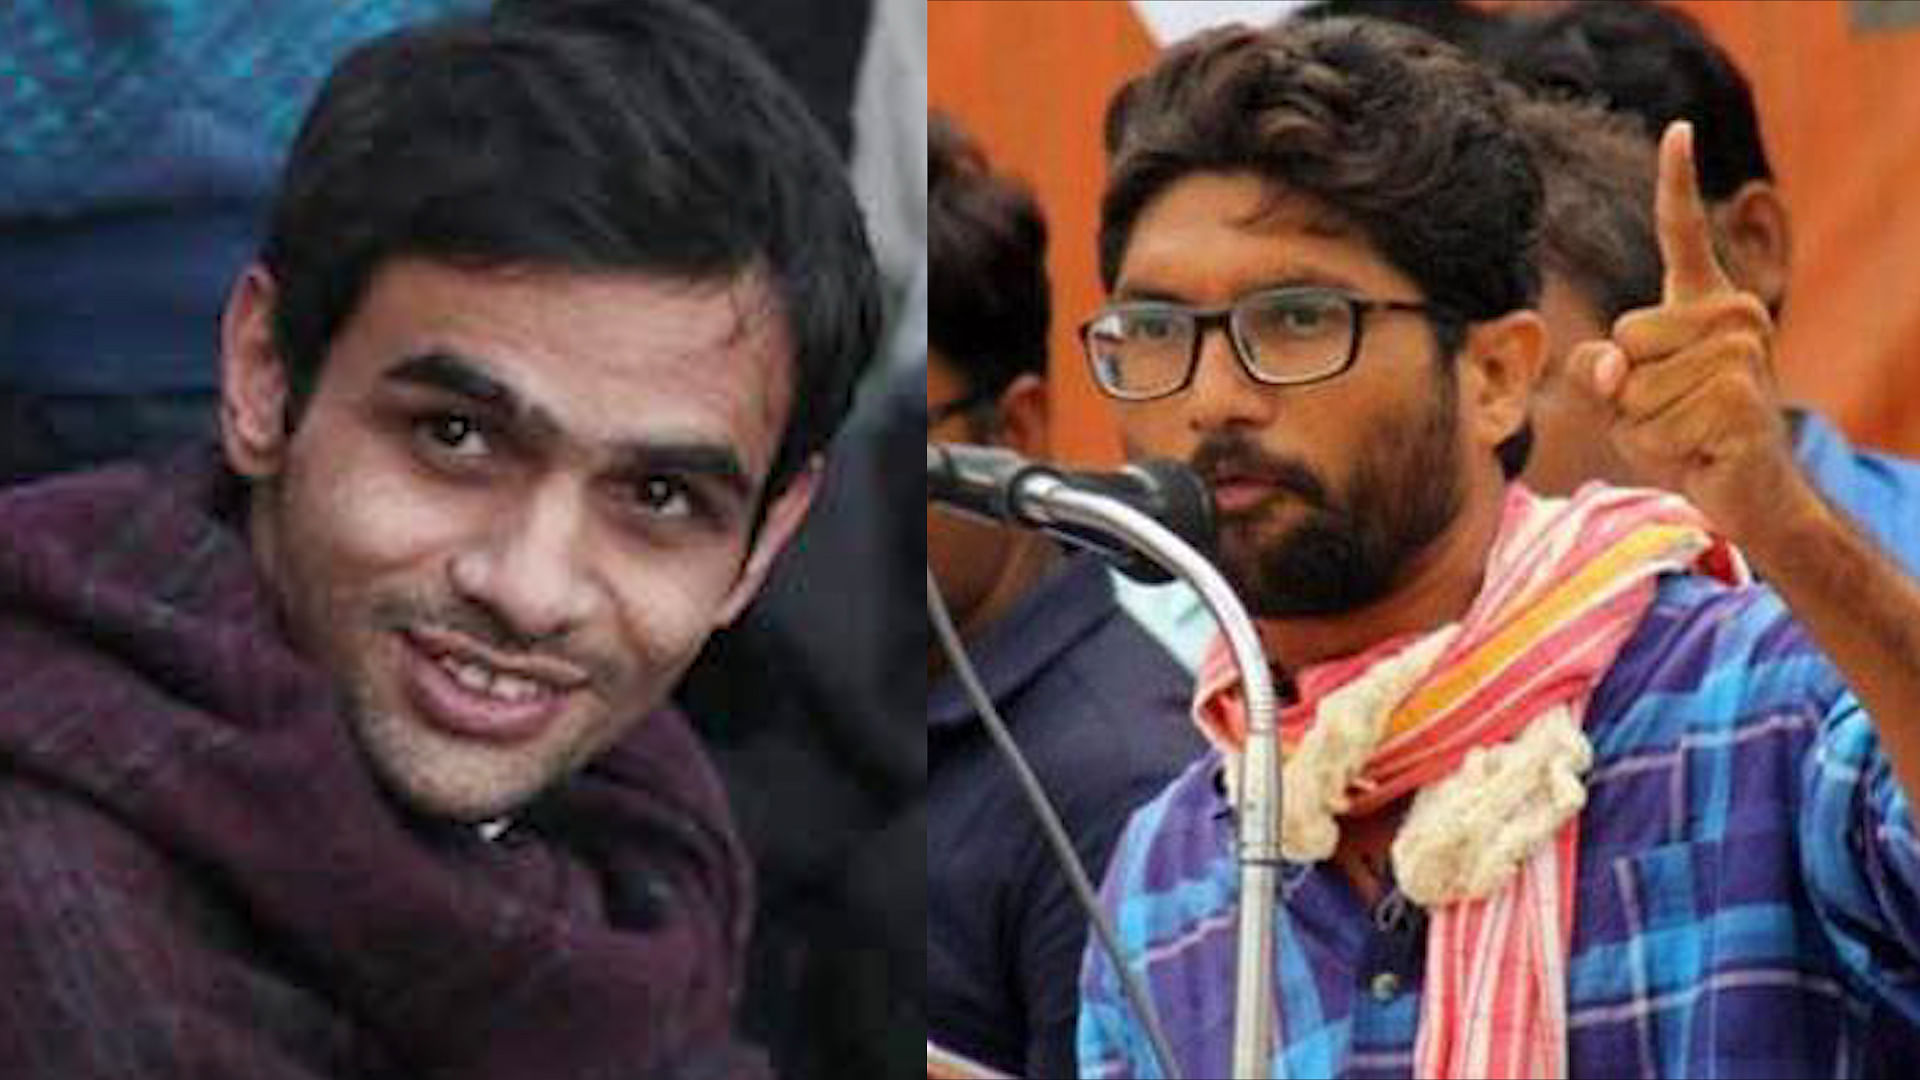  Following the Bhima Koregaon violence, the Mumbai Police denied permission to ‘All India Students Summit 2018’ that was to feature Jignesh Mevani and Umar Khalid.